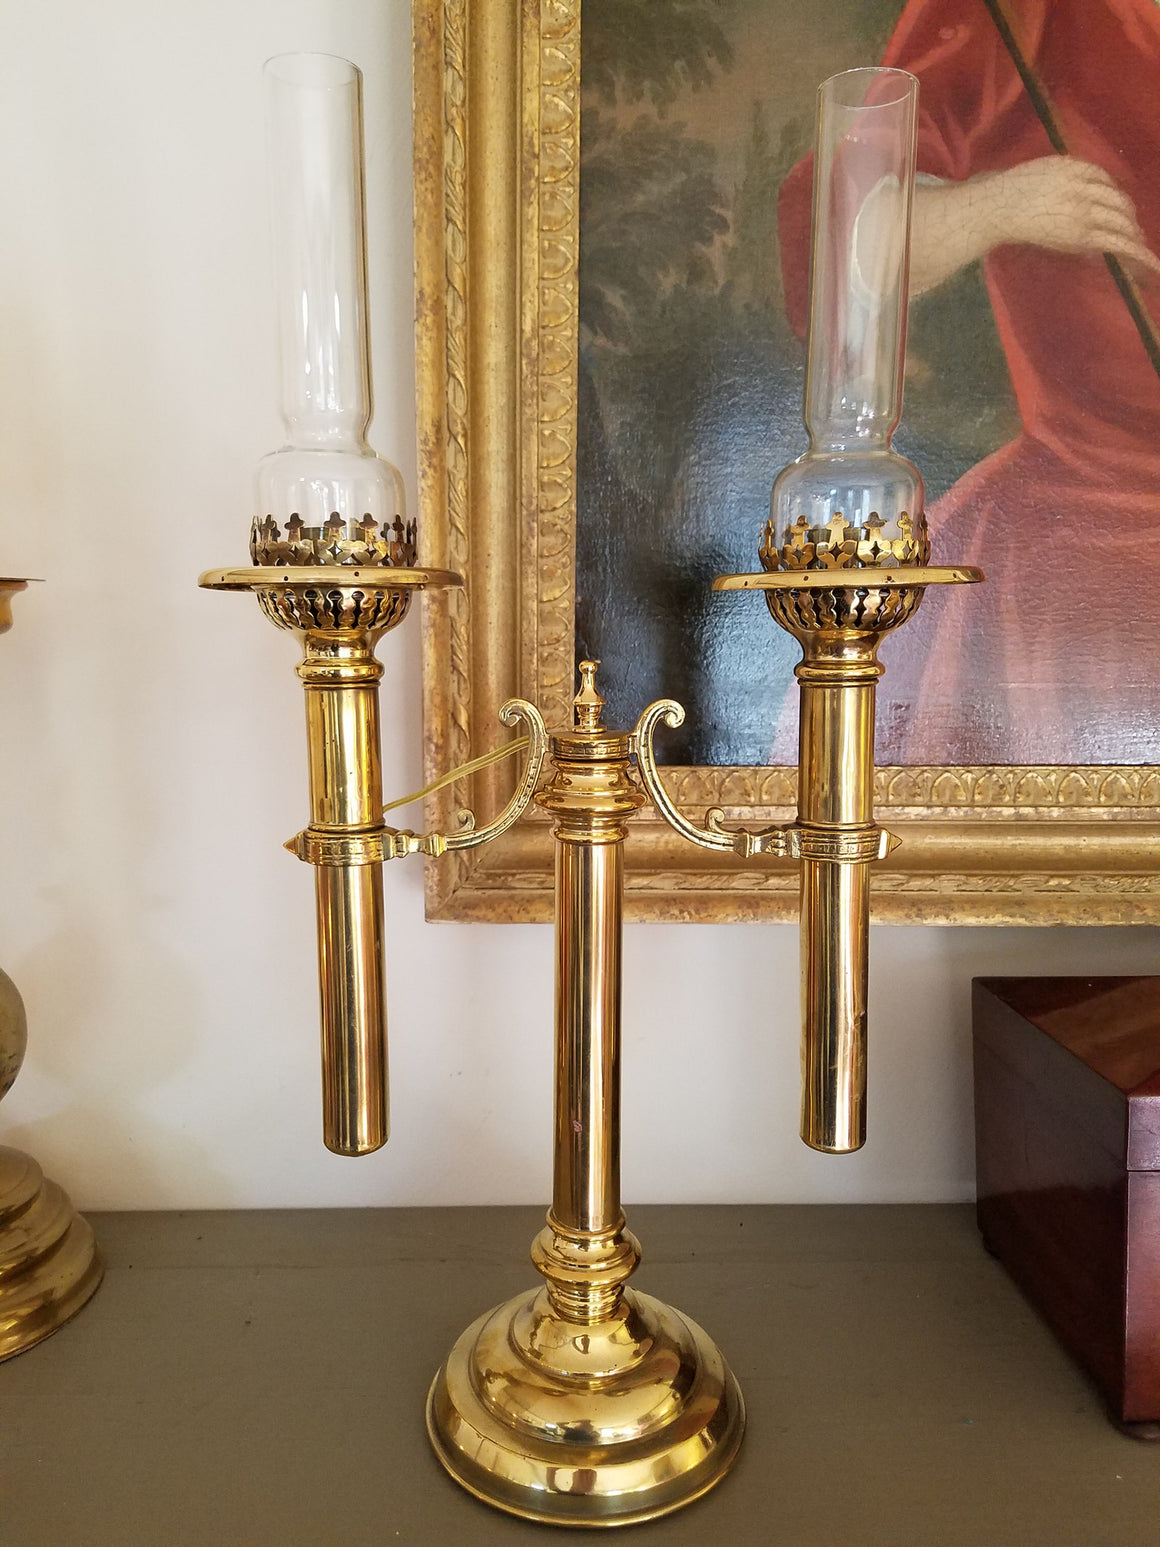 Double Arm Argand Style Lamp with glass chimneys